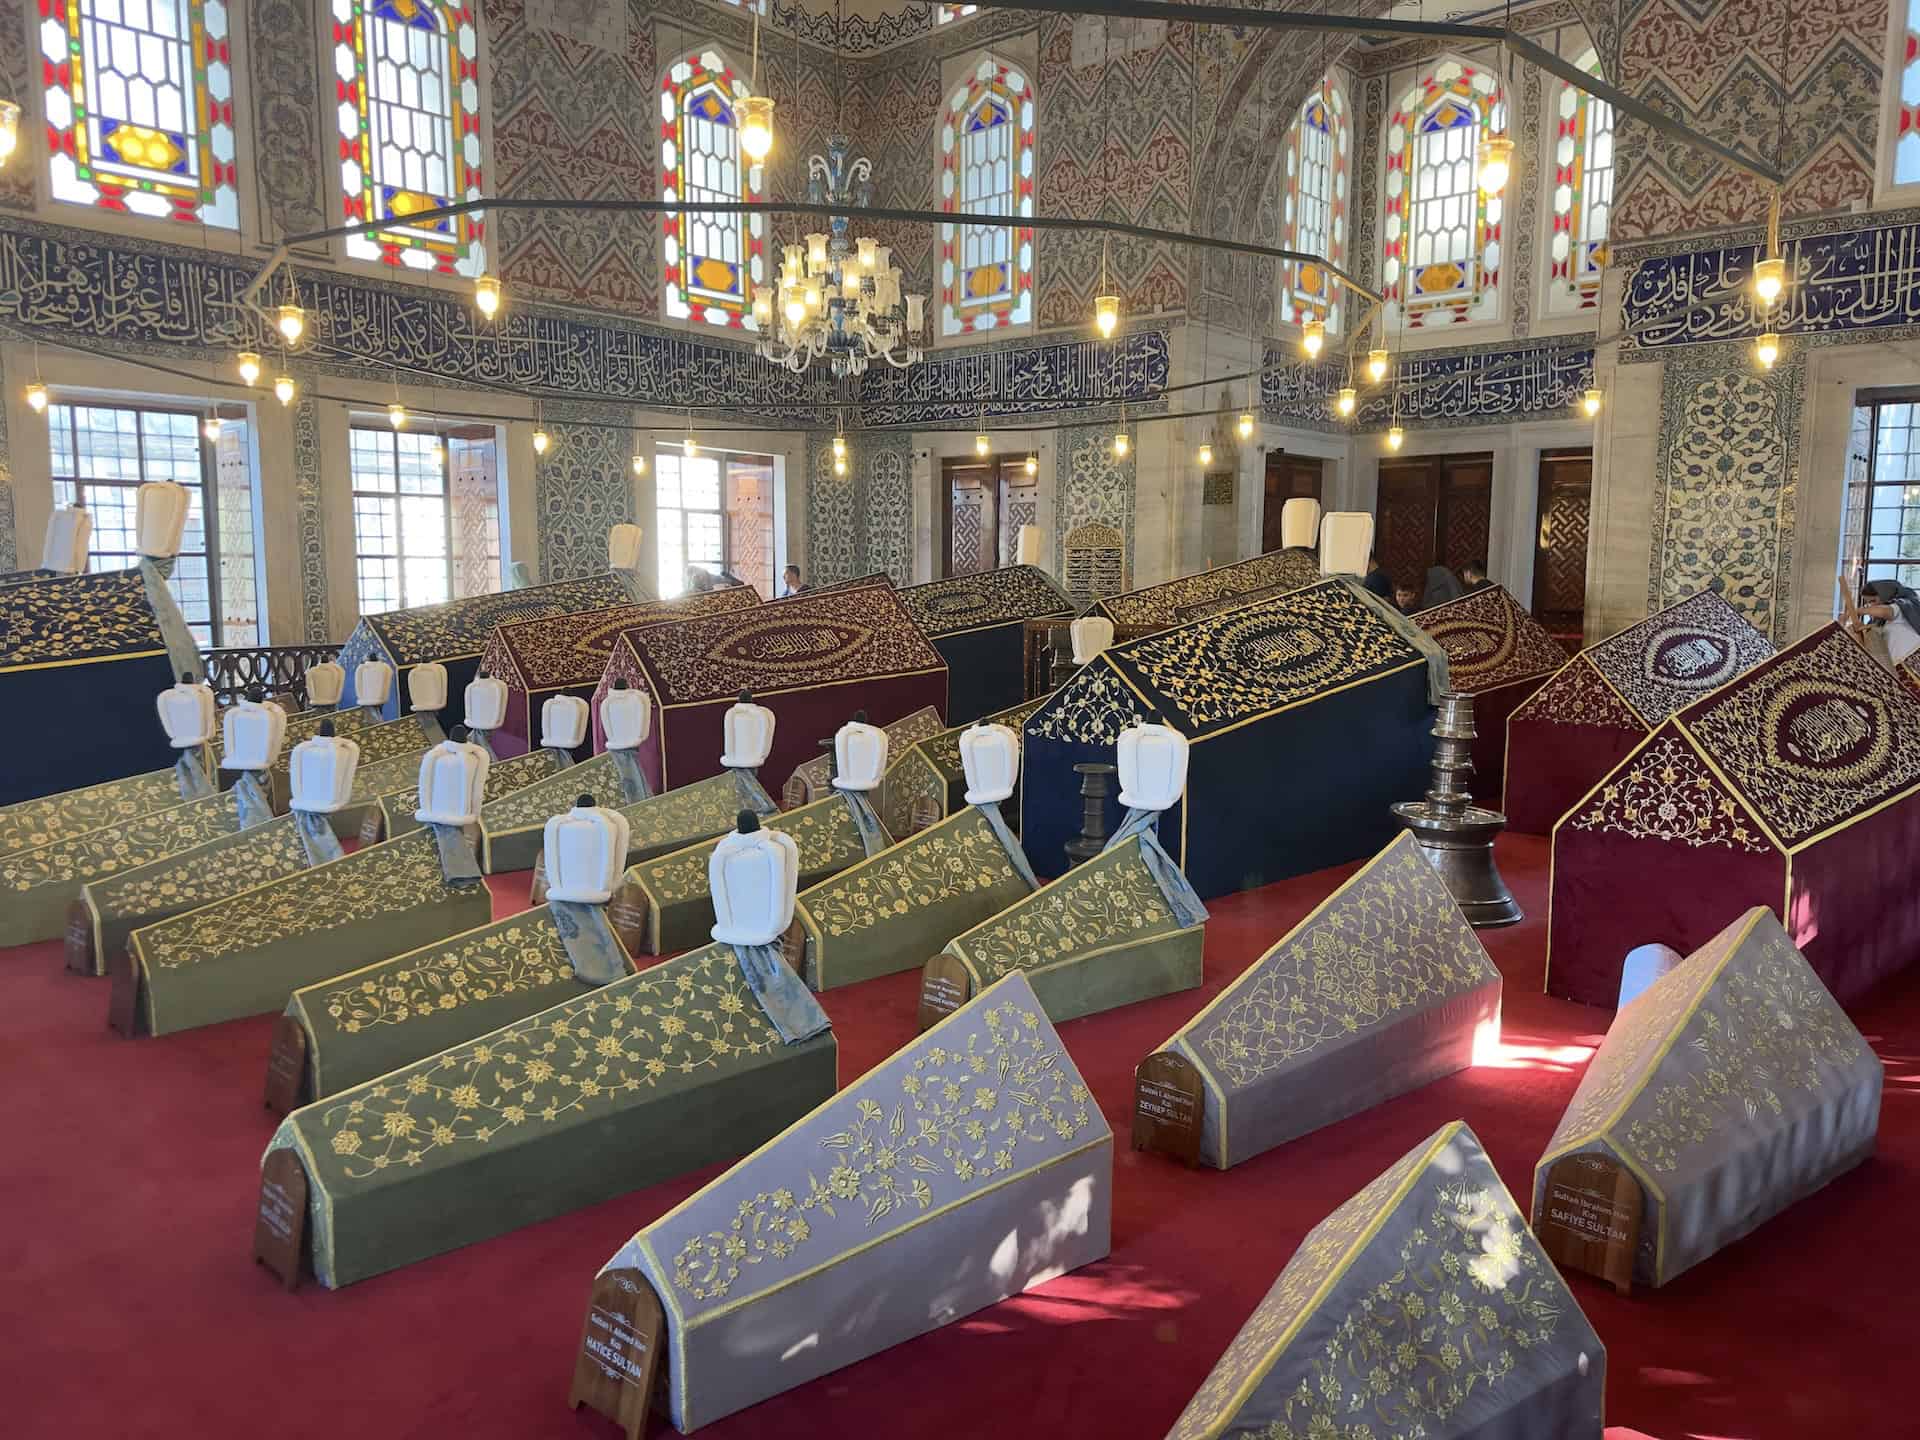 Tomb of Ahmed I in Sultanahmet, Istanbul, Turkey